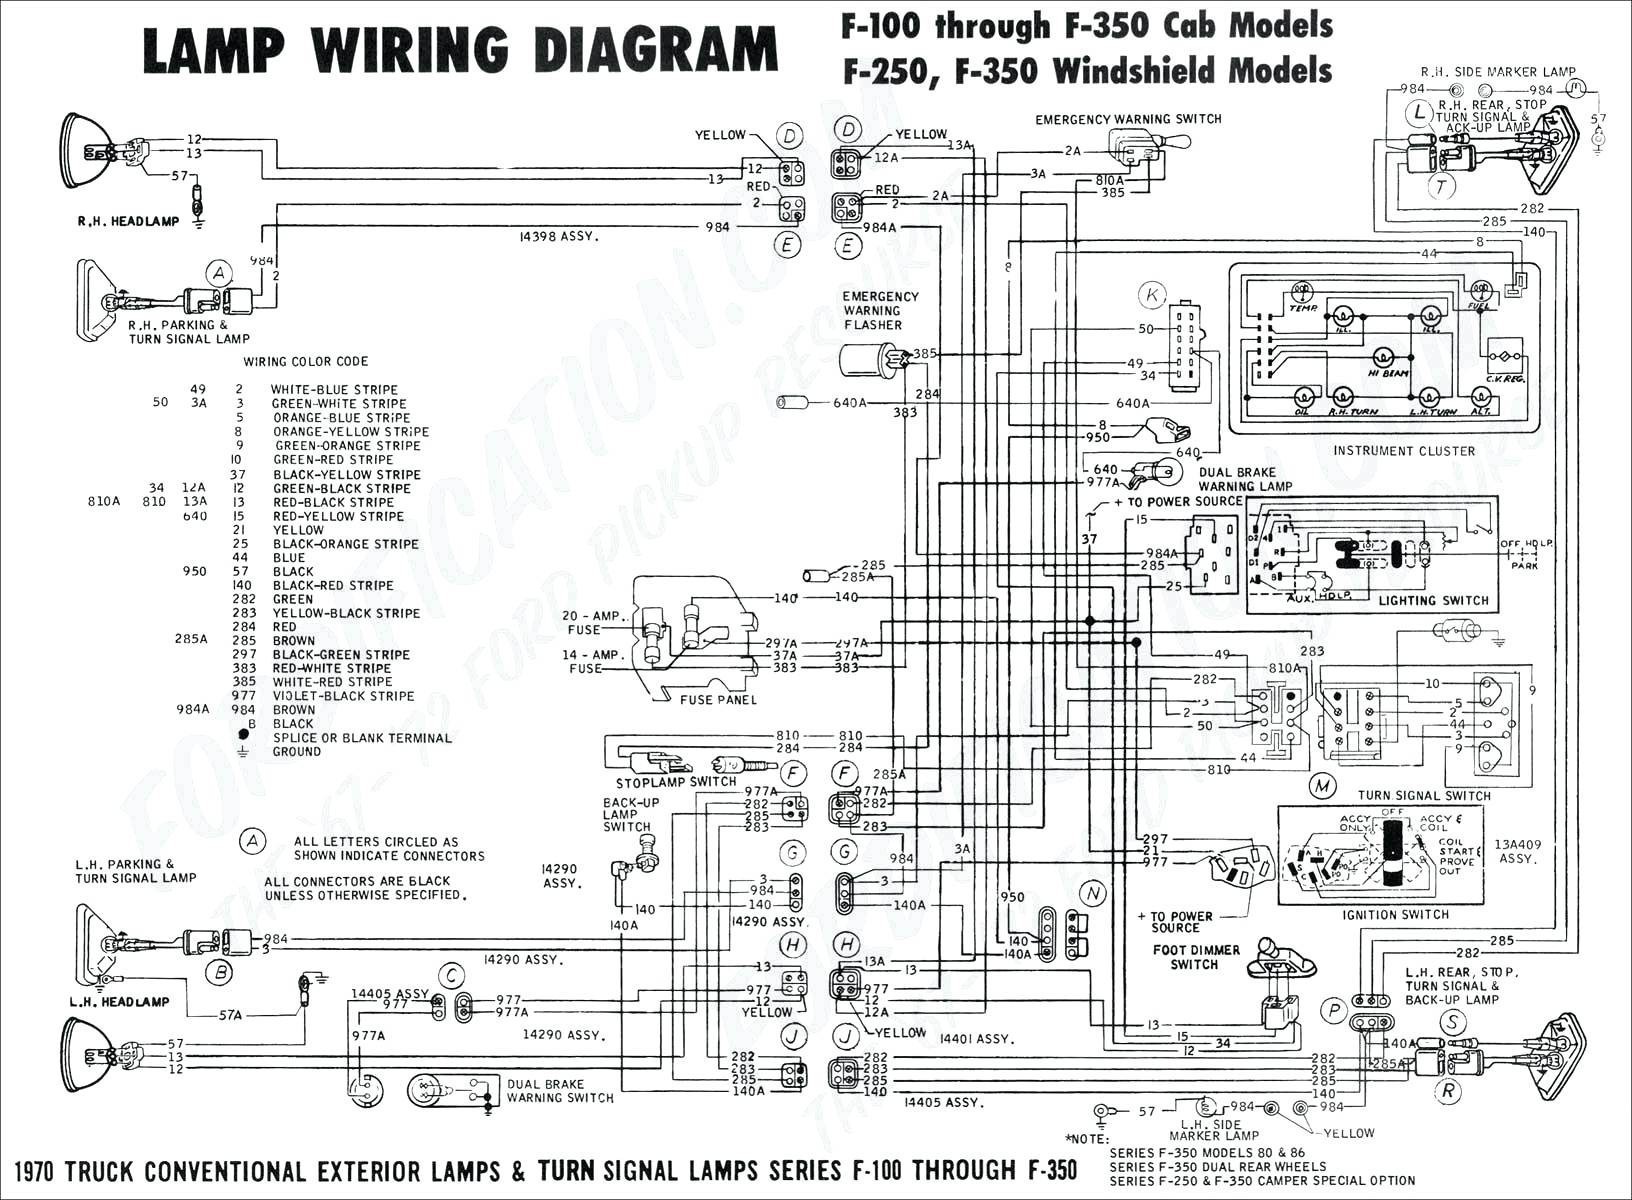 2001 ford f150 wiring diagram explained wiring diagrams 2003 ford f 250 wiring diagram 2001